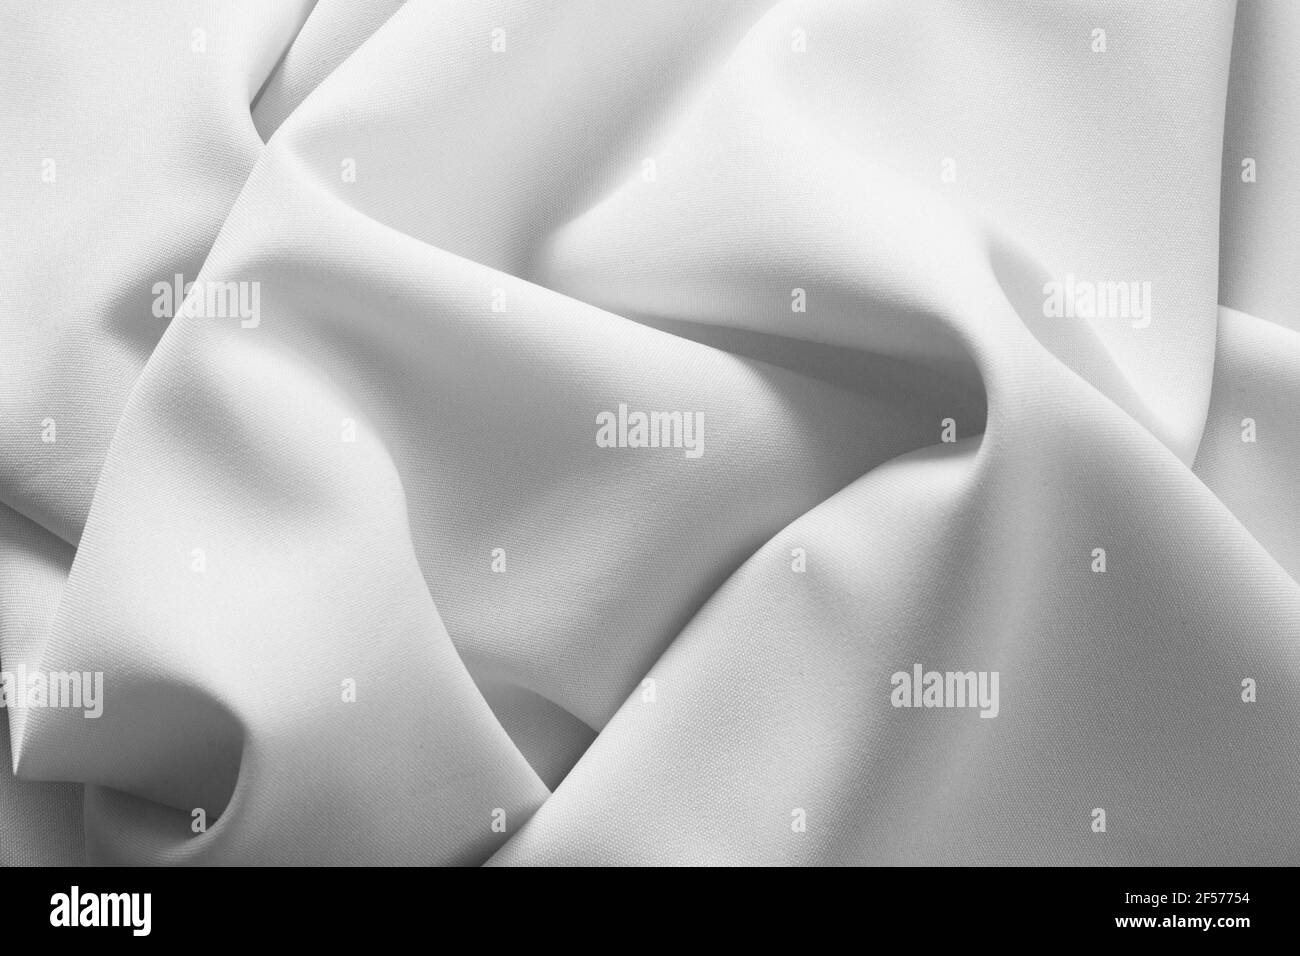 White cotton fabric texture background. Abstract white fabric with